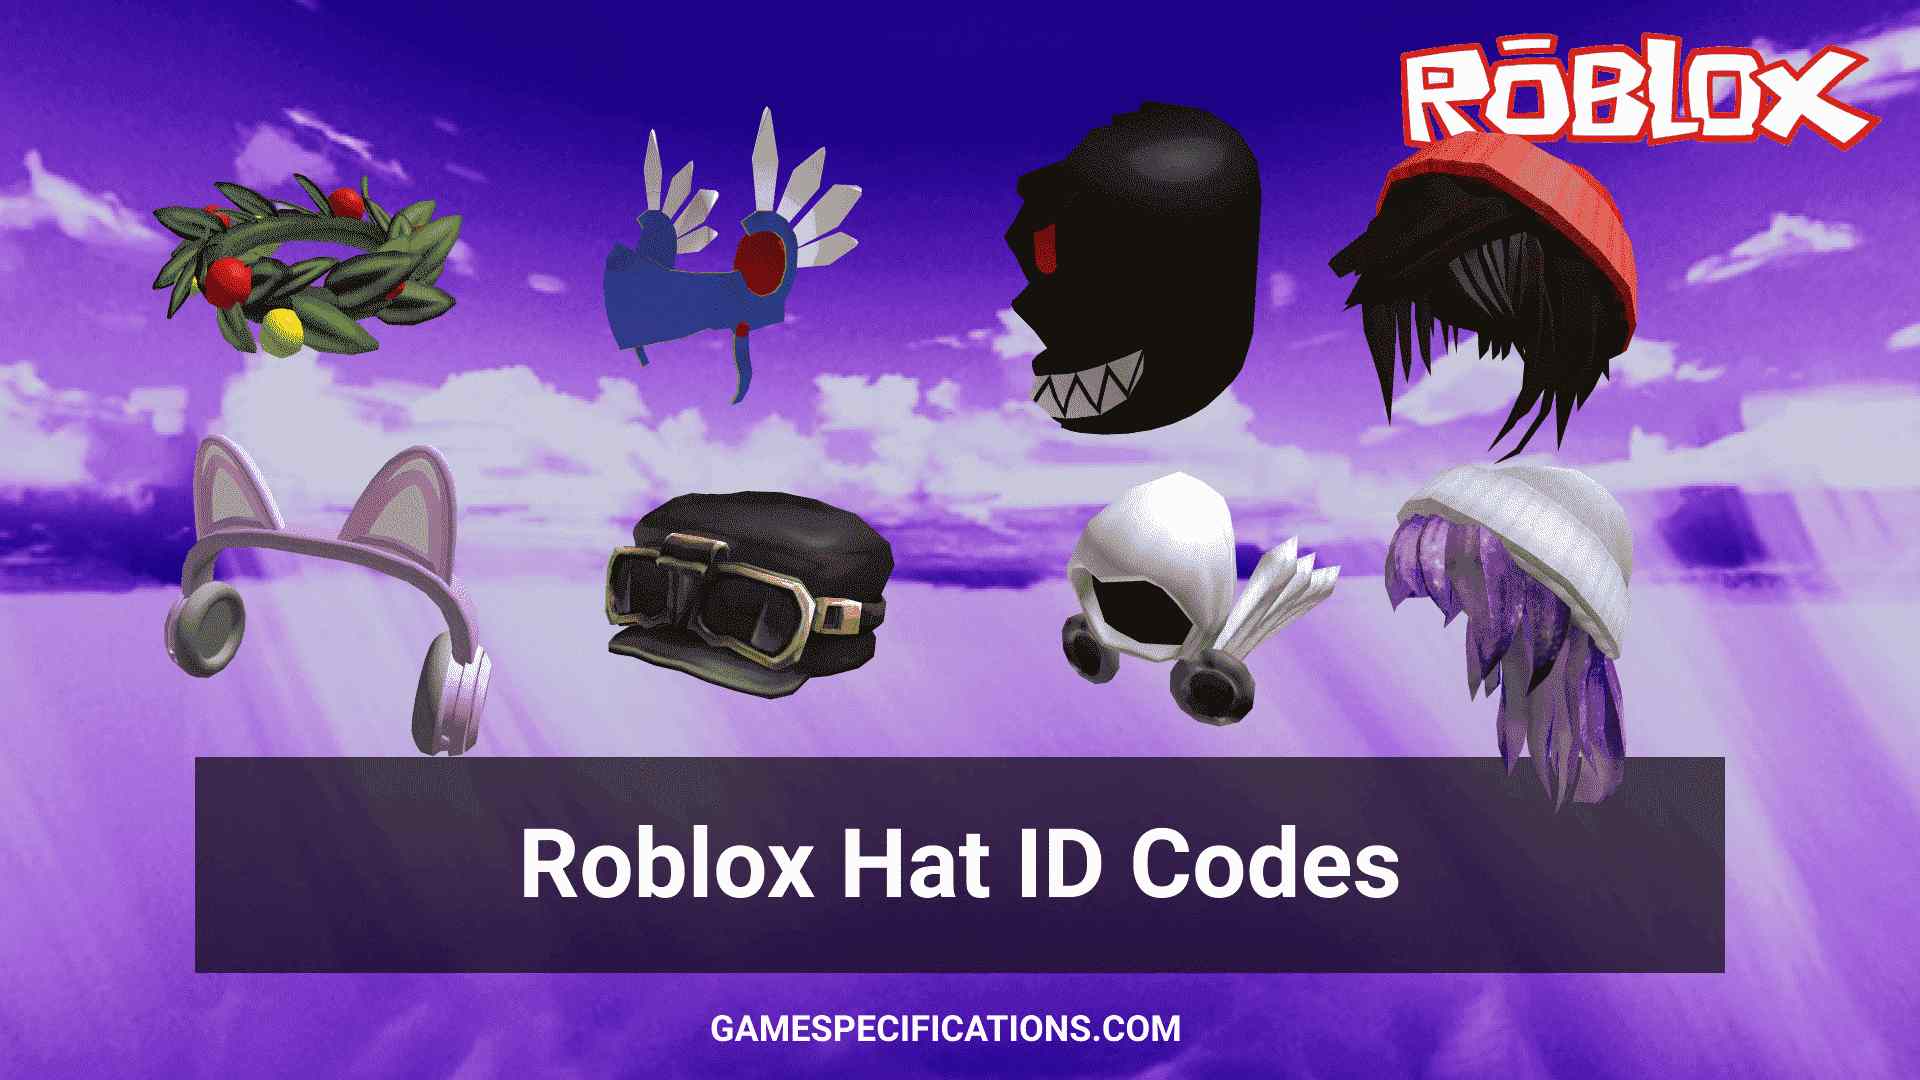 83 Roblox Hat IDs Thatll Make You Look Incredible  Game Specifications